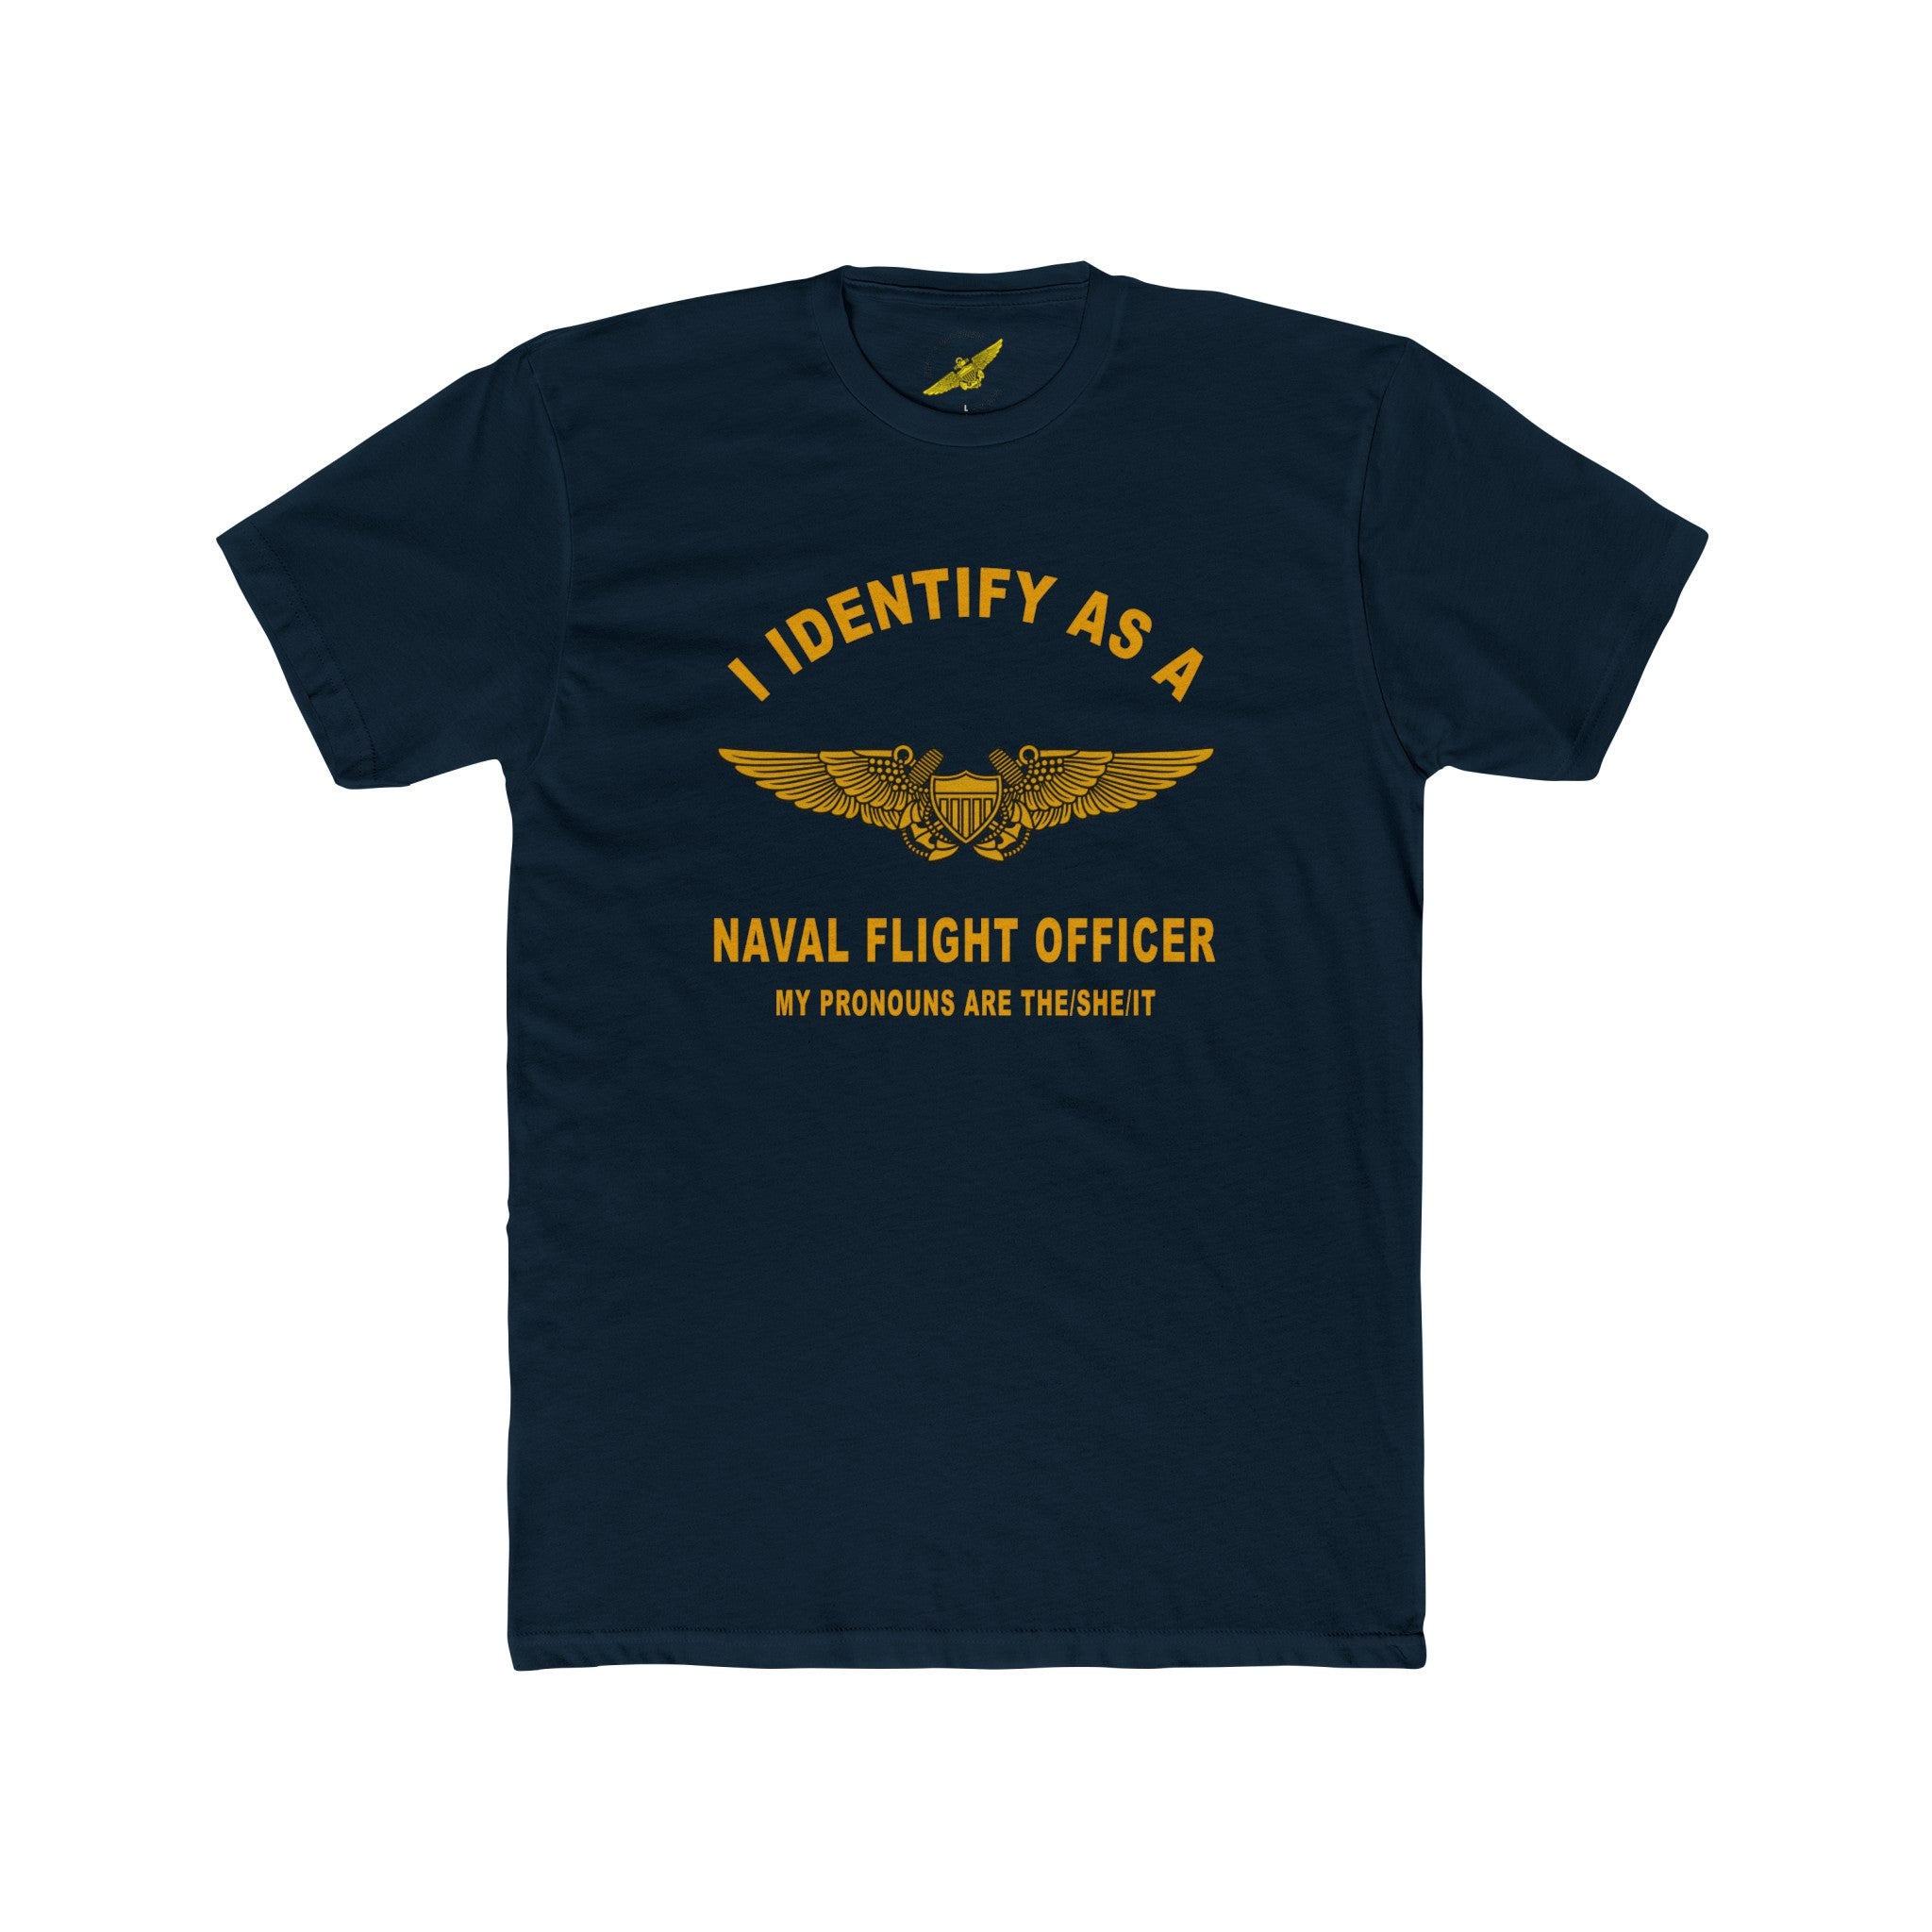 I Identify as a Naval Flight OfficerT-Shirt - Show Your Aviation Pride!